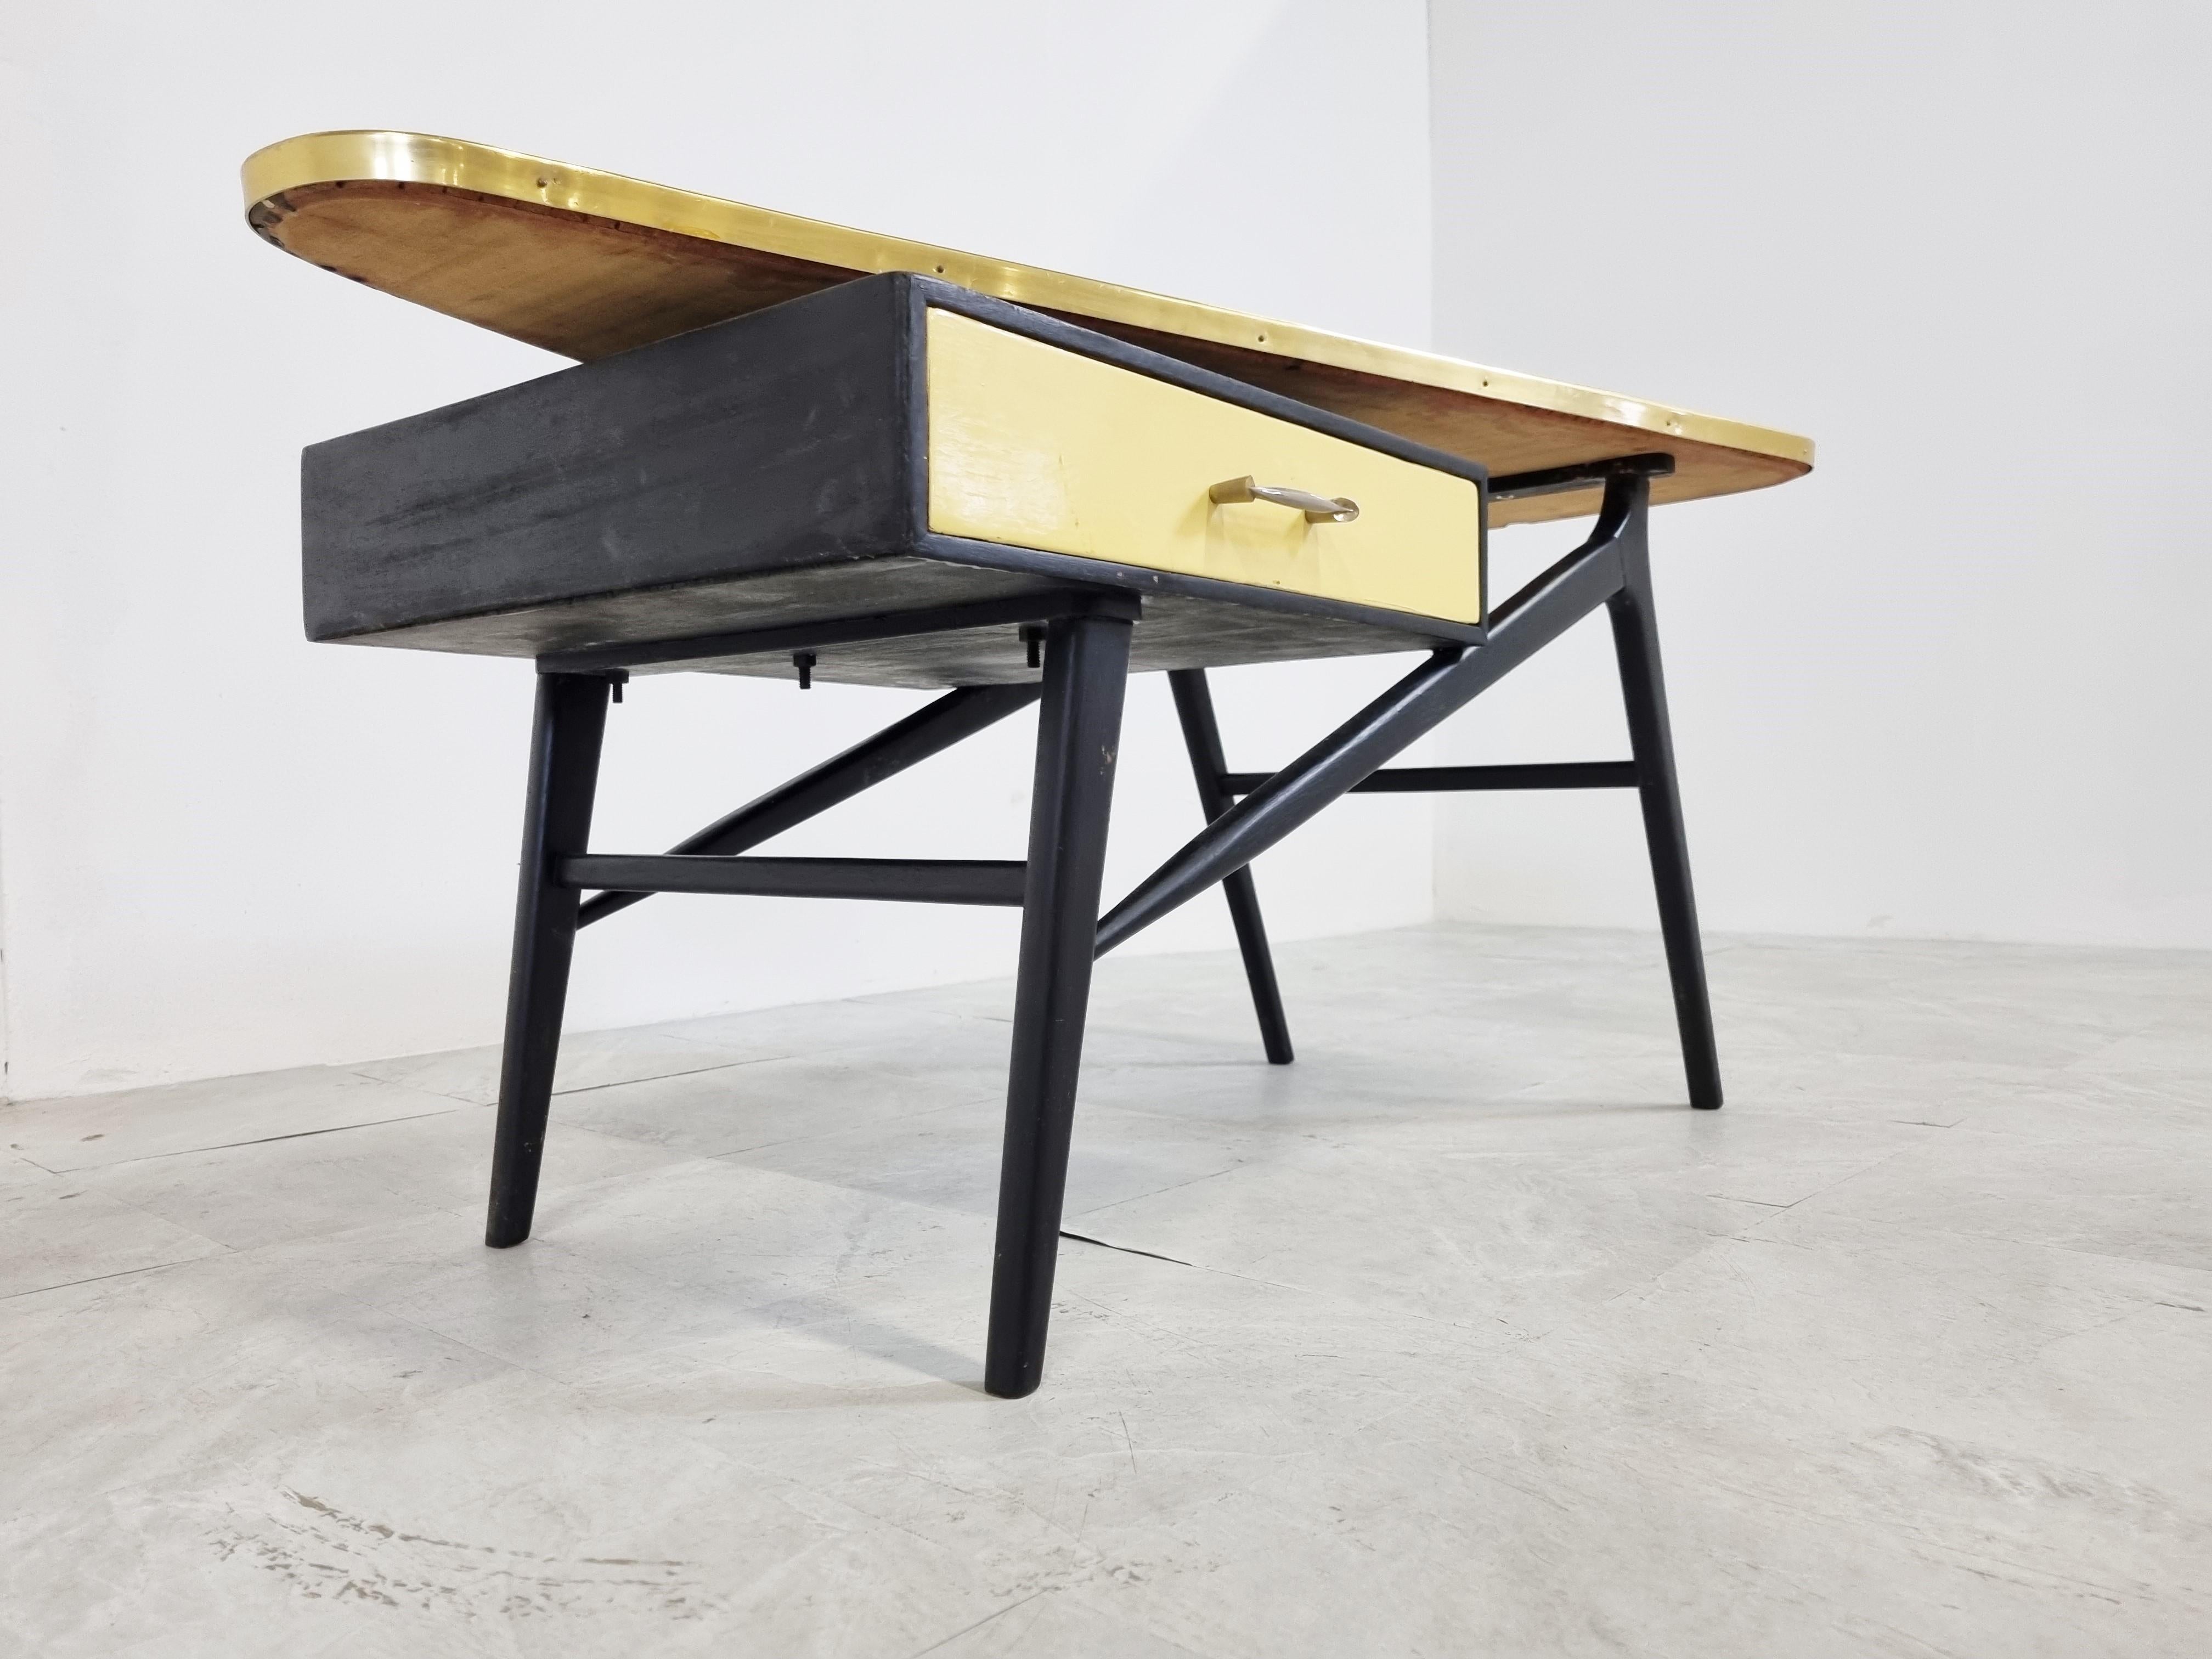 Mid-Century Modern coffee table with a triangular yellow wooden top, elegantly designed black lacquered wooden base and a drawer.

Beautiful design from the 50's, with a nicely shaped handle on the drawer.

Good condition with normal age related